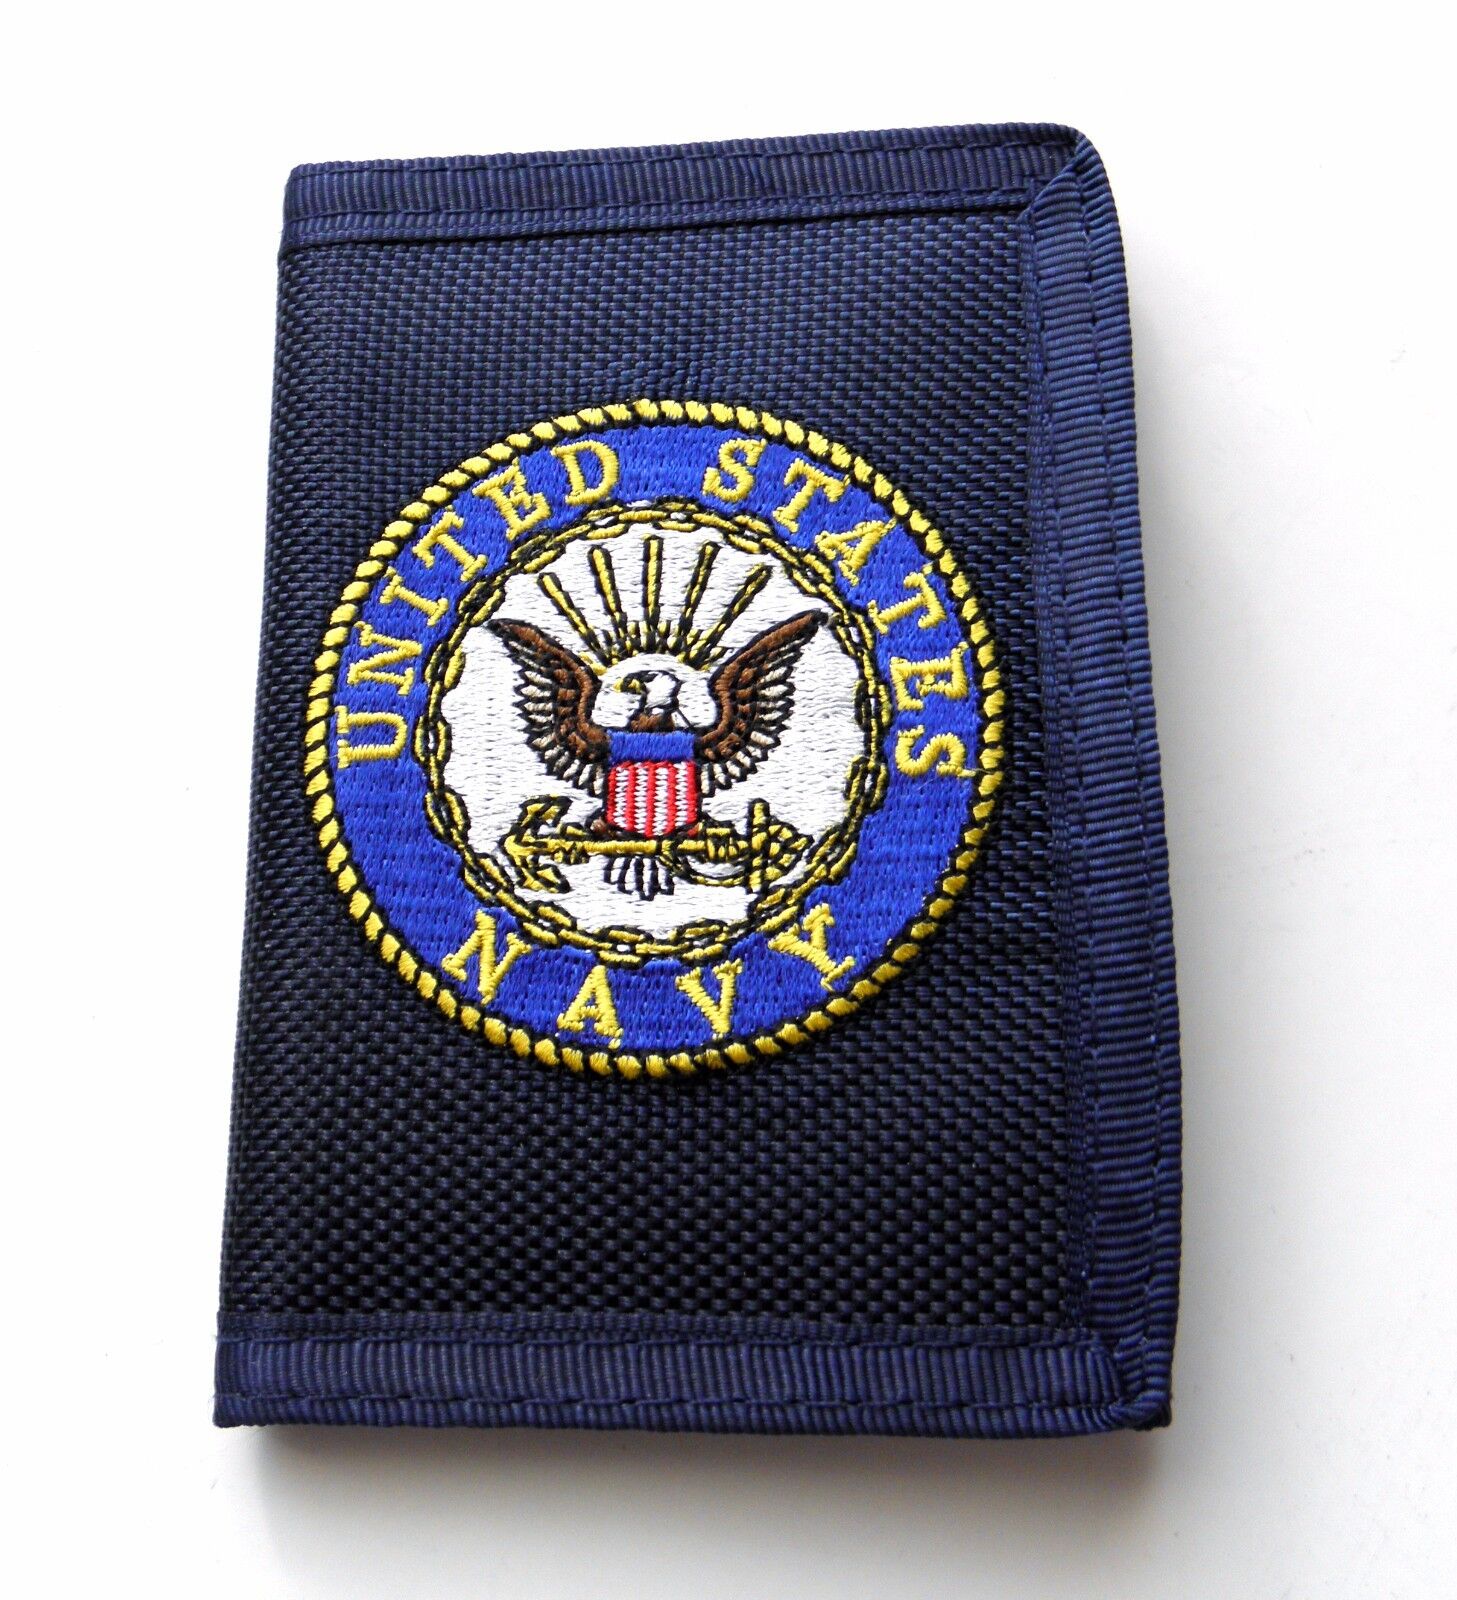 USN US NAVY HEAVY DUTY NYLON EMBROIDERED WALLET TRIFOLD